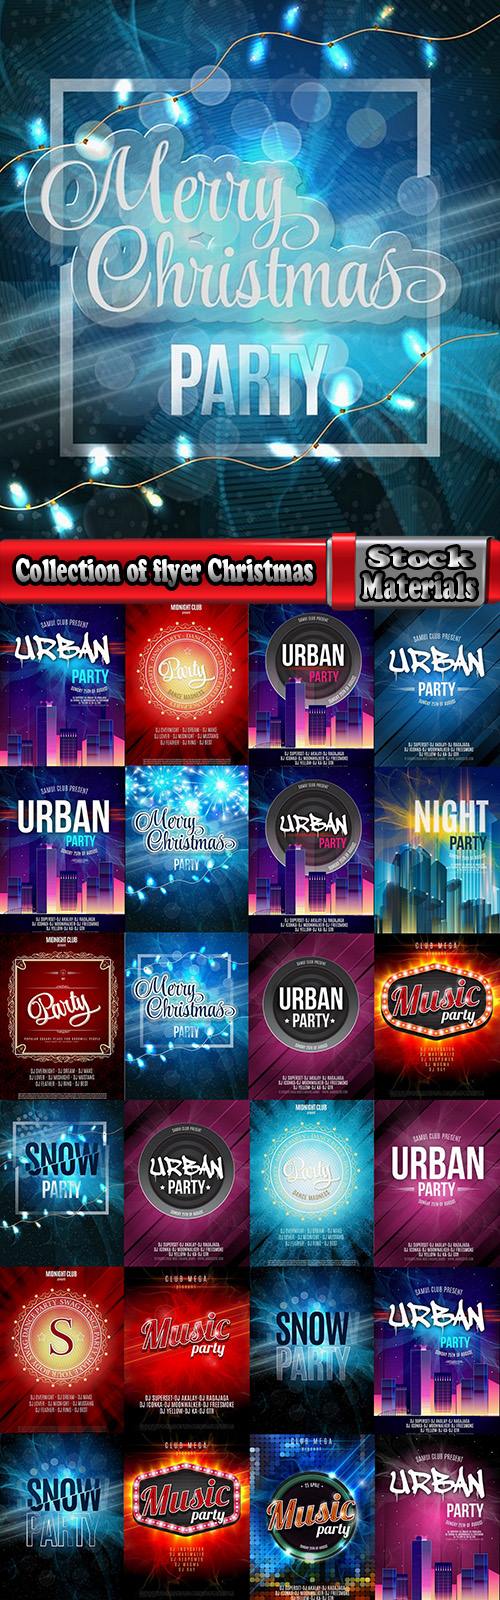 Collection of flyer Christmas party invitation card 25 EPS